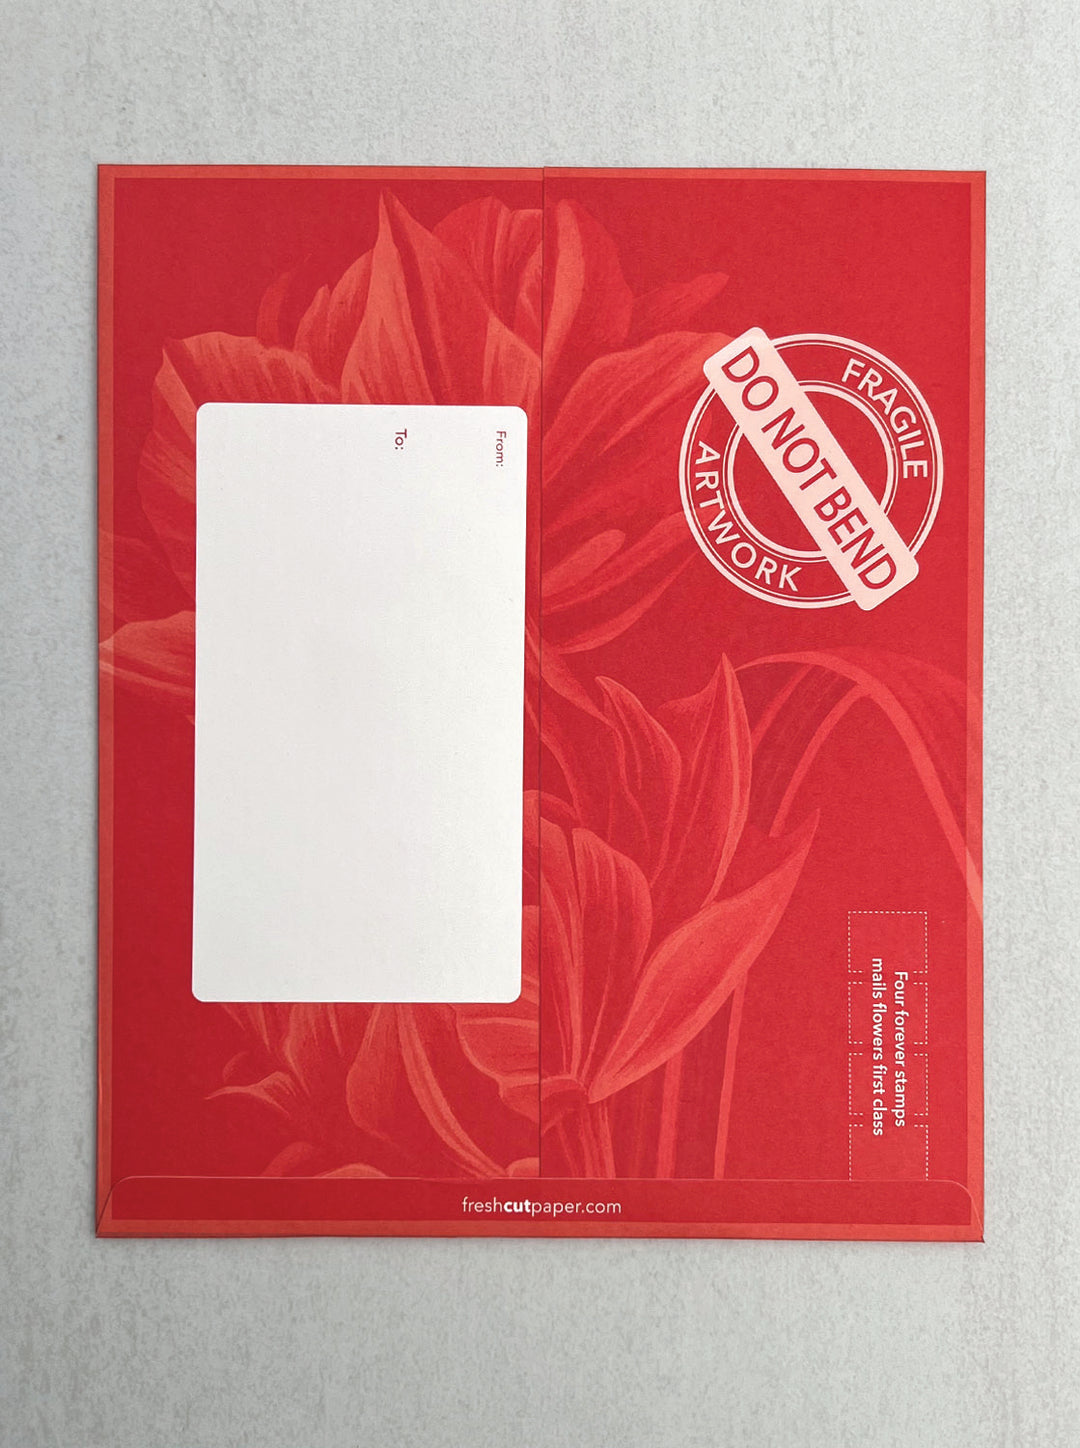 Our Murillo Tulips pop up flowers will be ready to ship to your recipient in a festive red envelope. The band indicating your flower may be removed prior to mailing as an added surprise for your recipient. If your flowers are FreshCut Paper, they'll last forever!